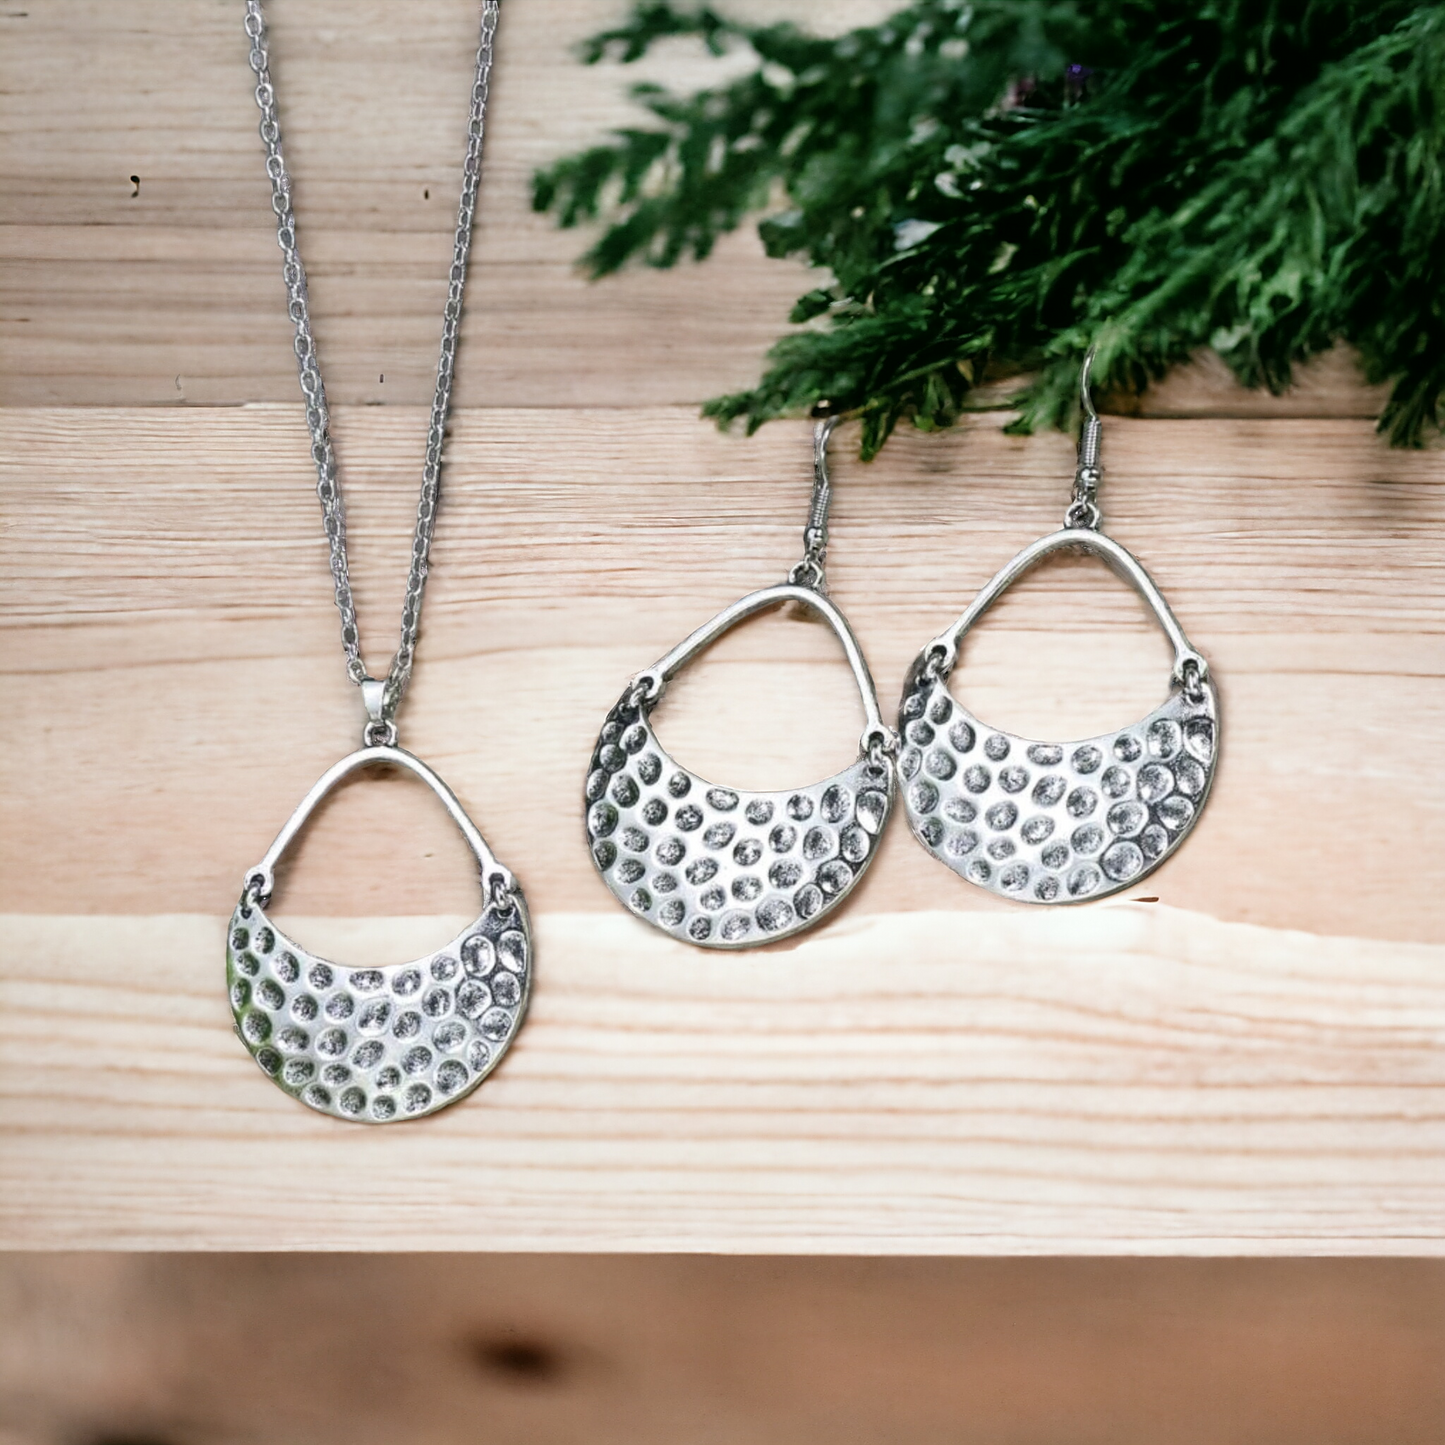 Shield and armor necklace set